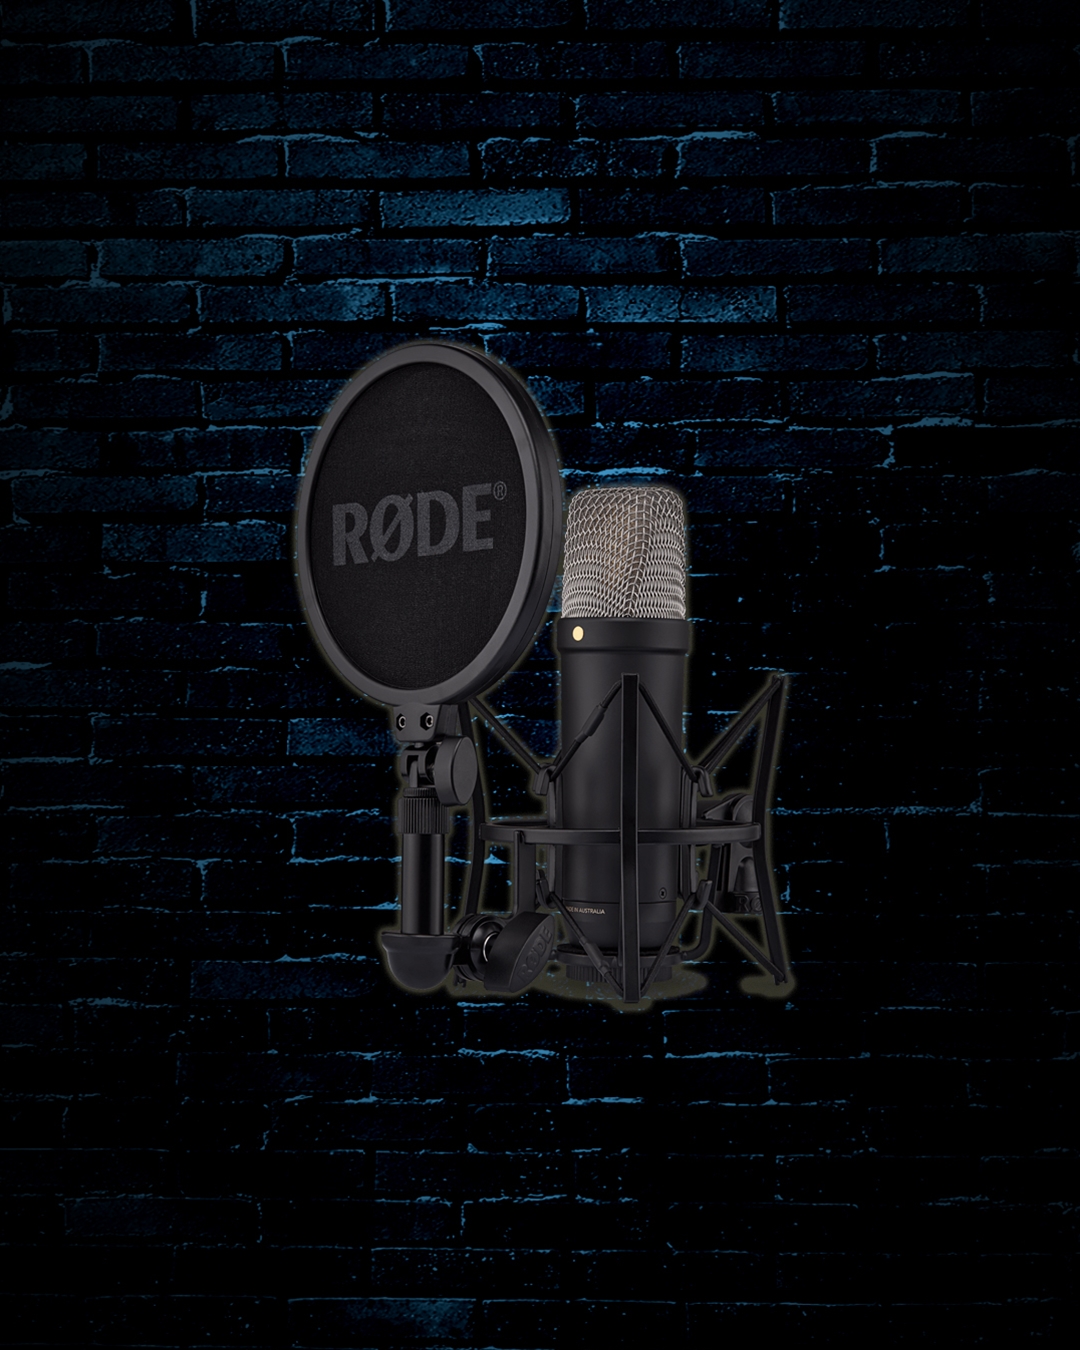 Rode NT1 5th Generation Mic Review: Dual Connectivity